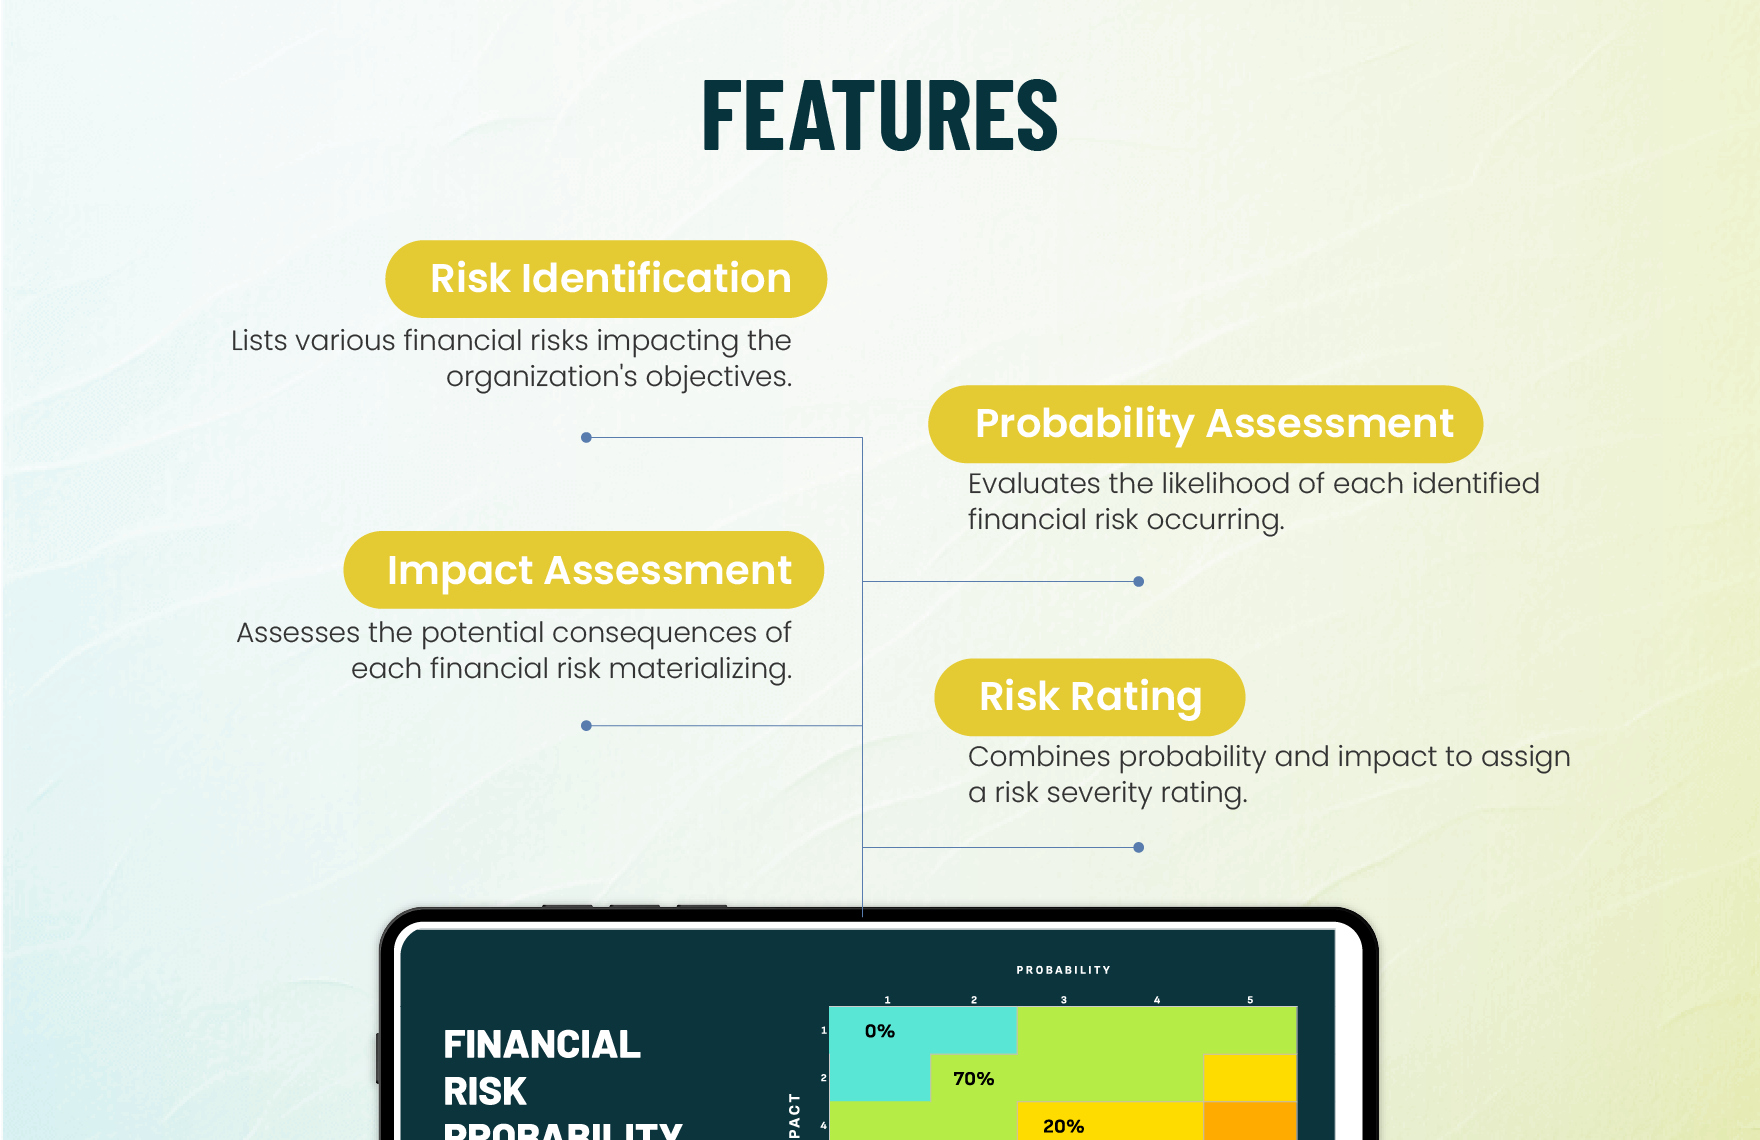 Financial Risk Probability and Impact Template